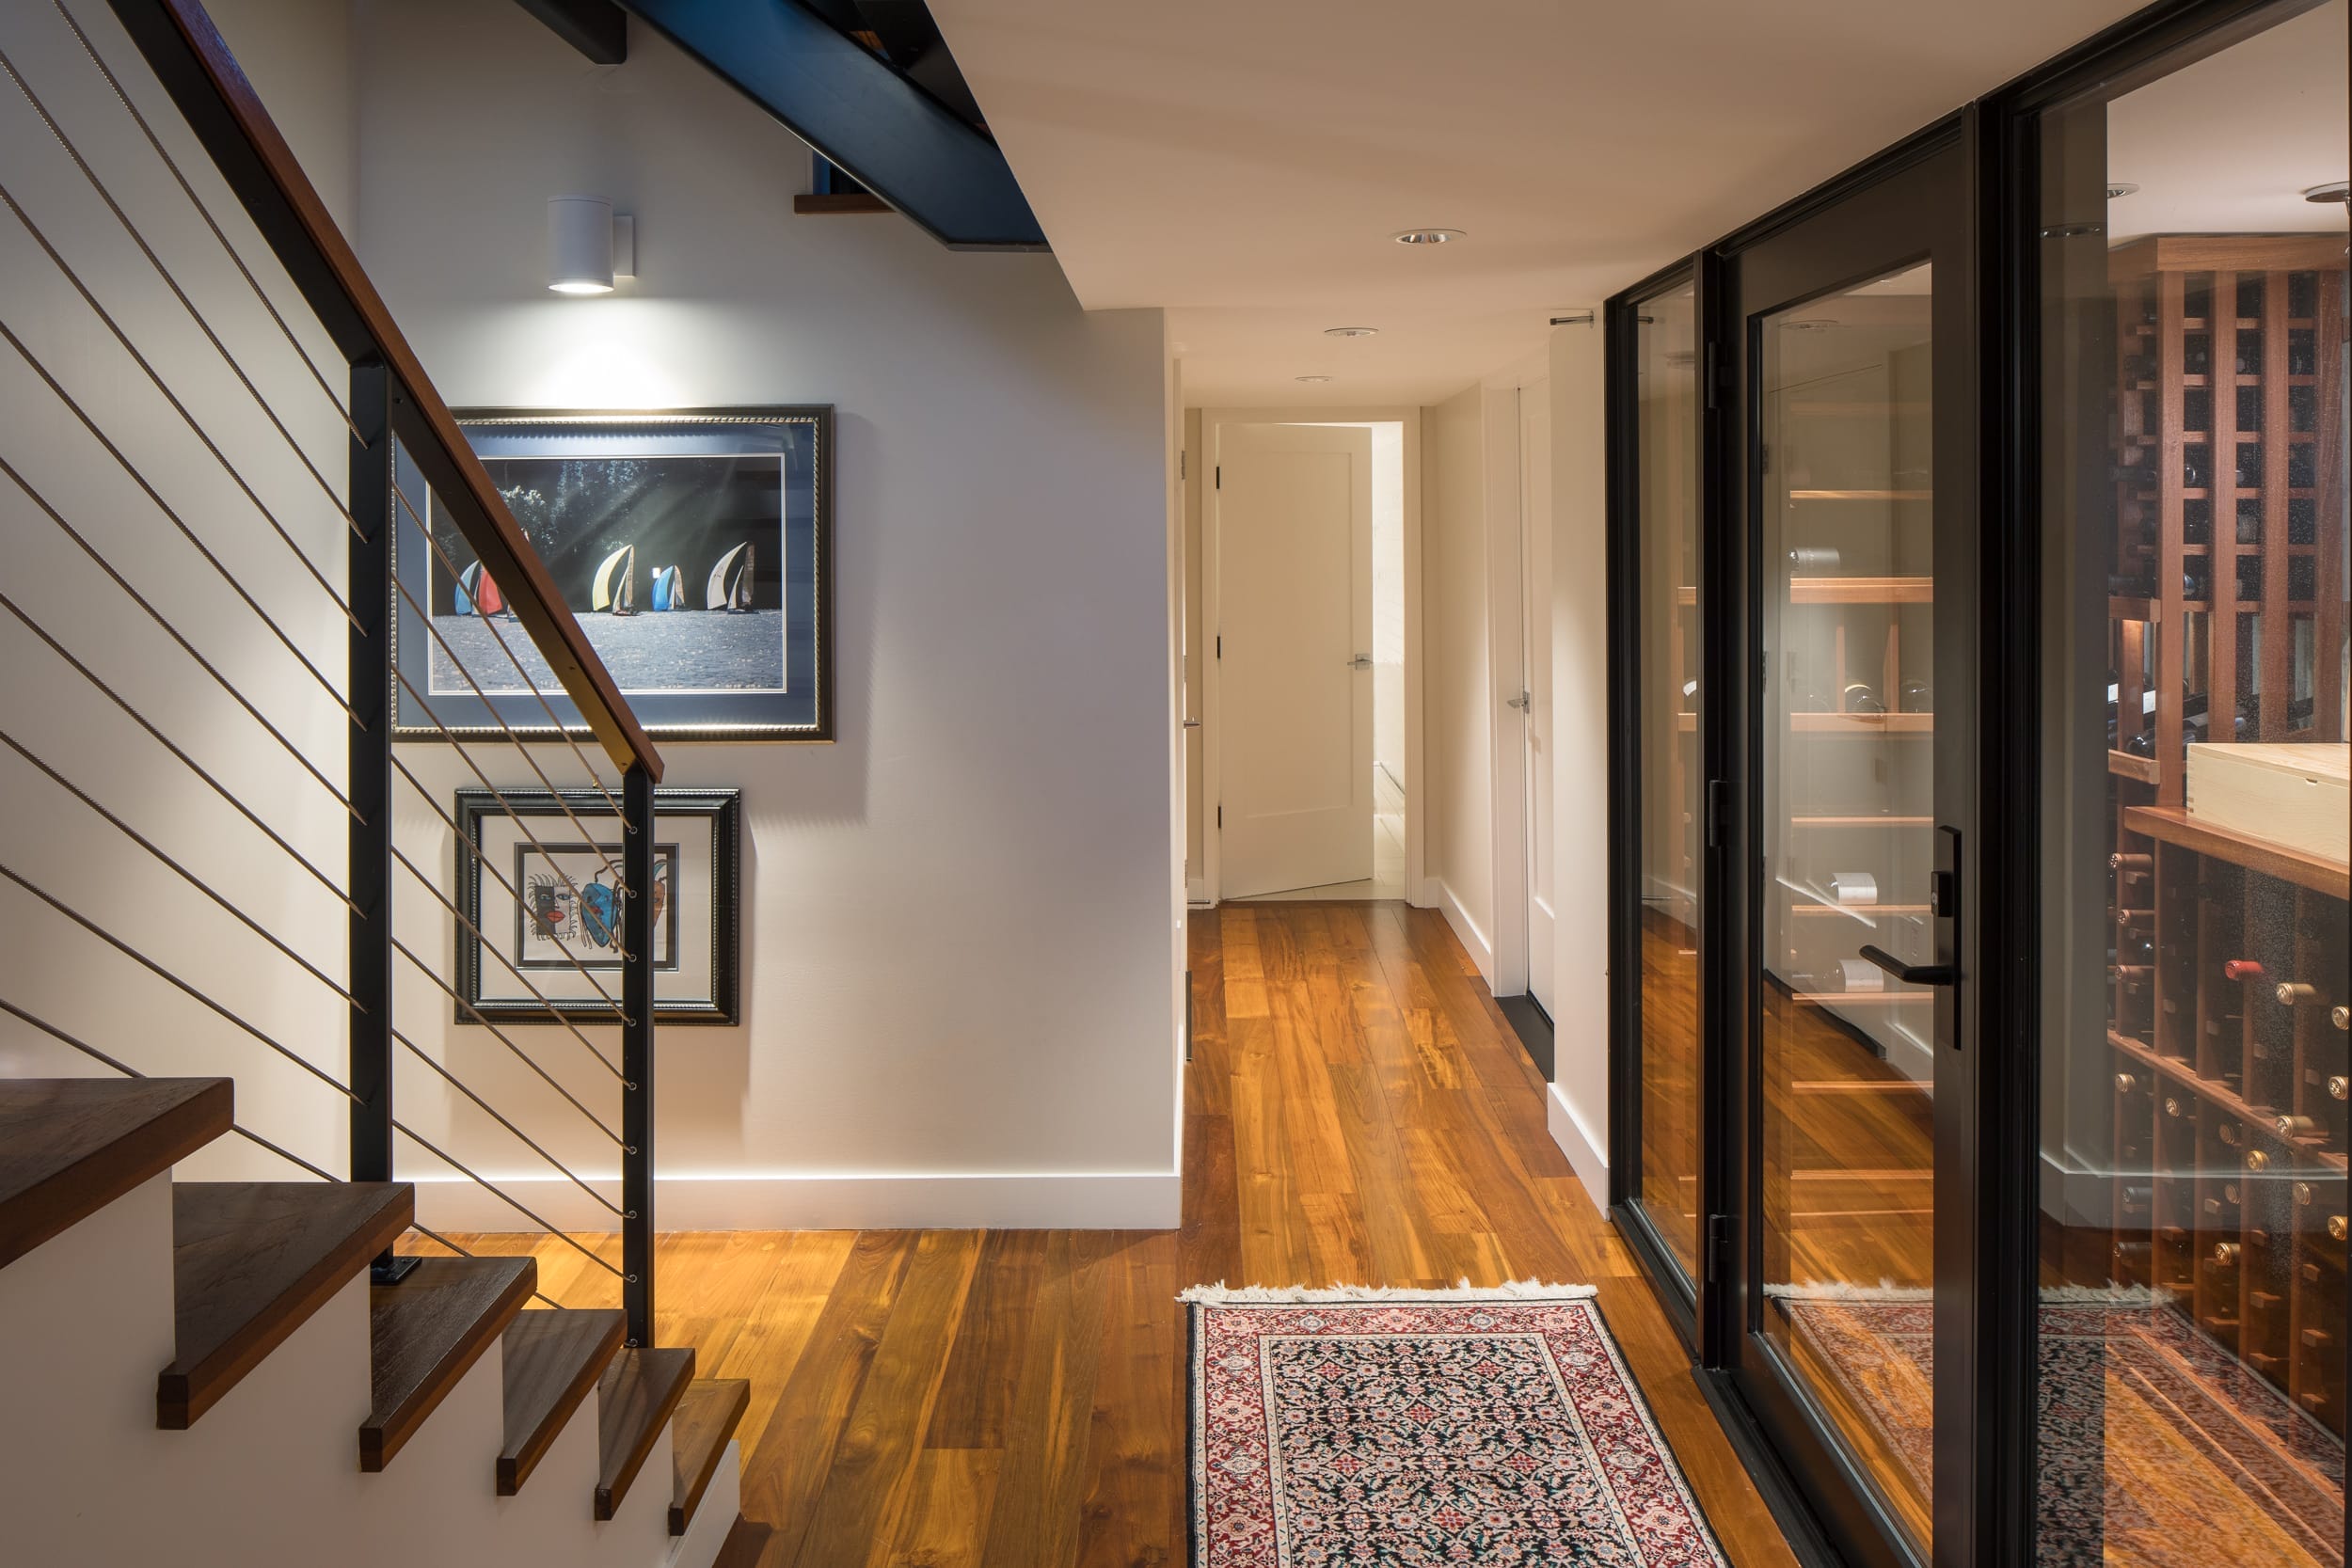 A modern hallway leading to a wine cellar in a floating home.